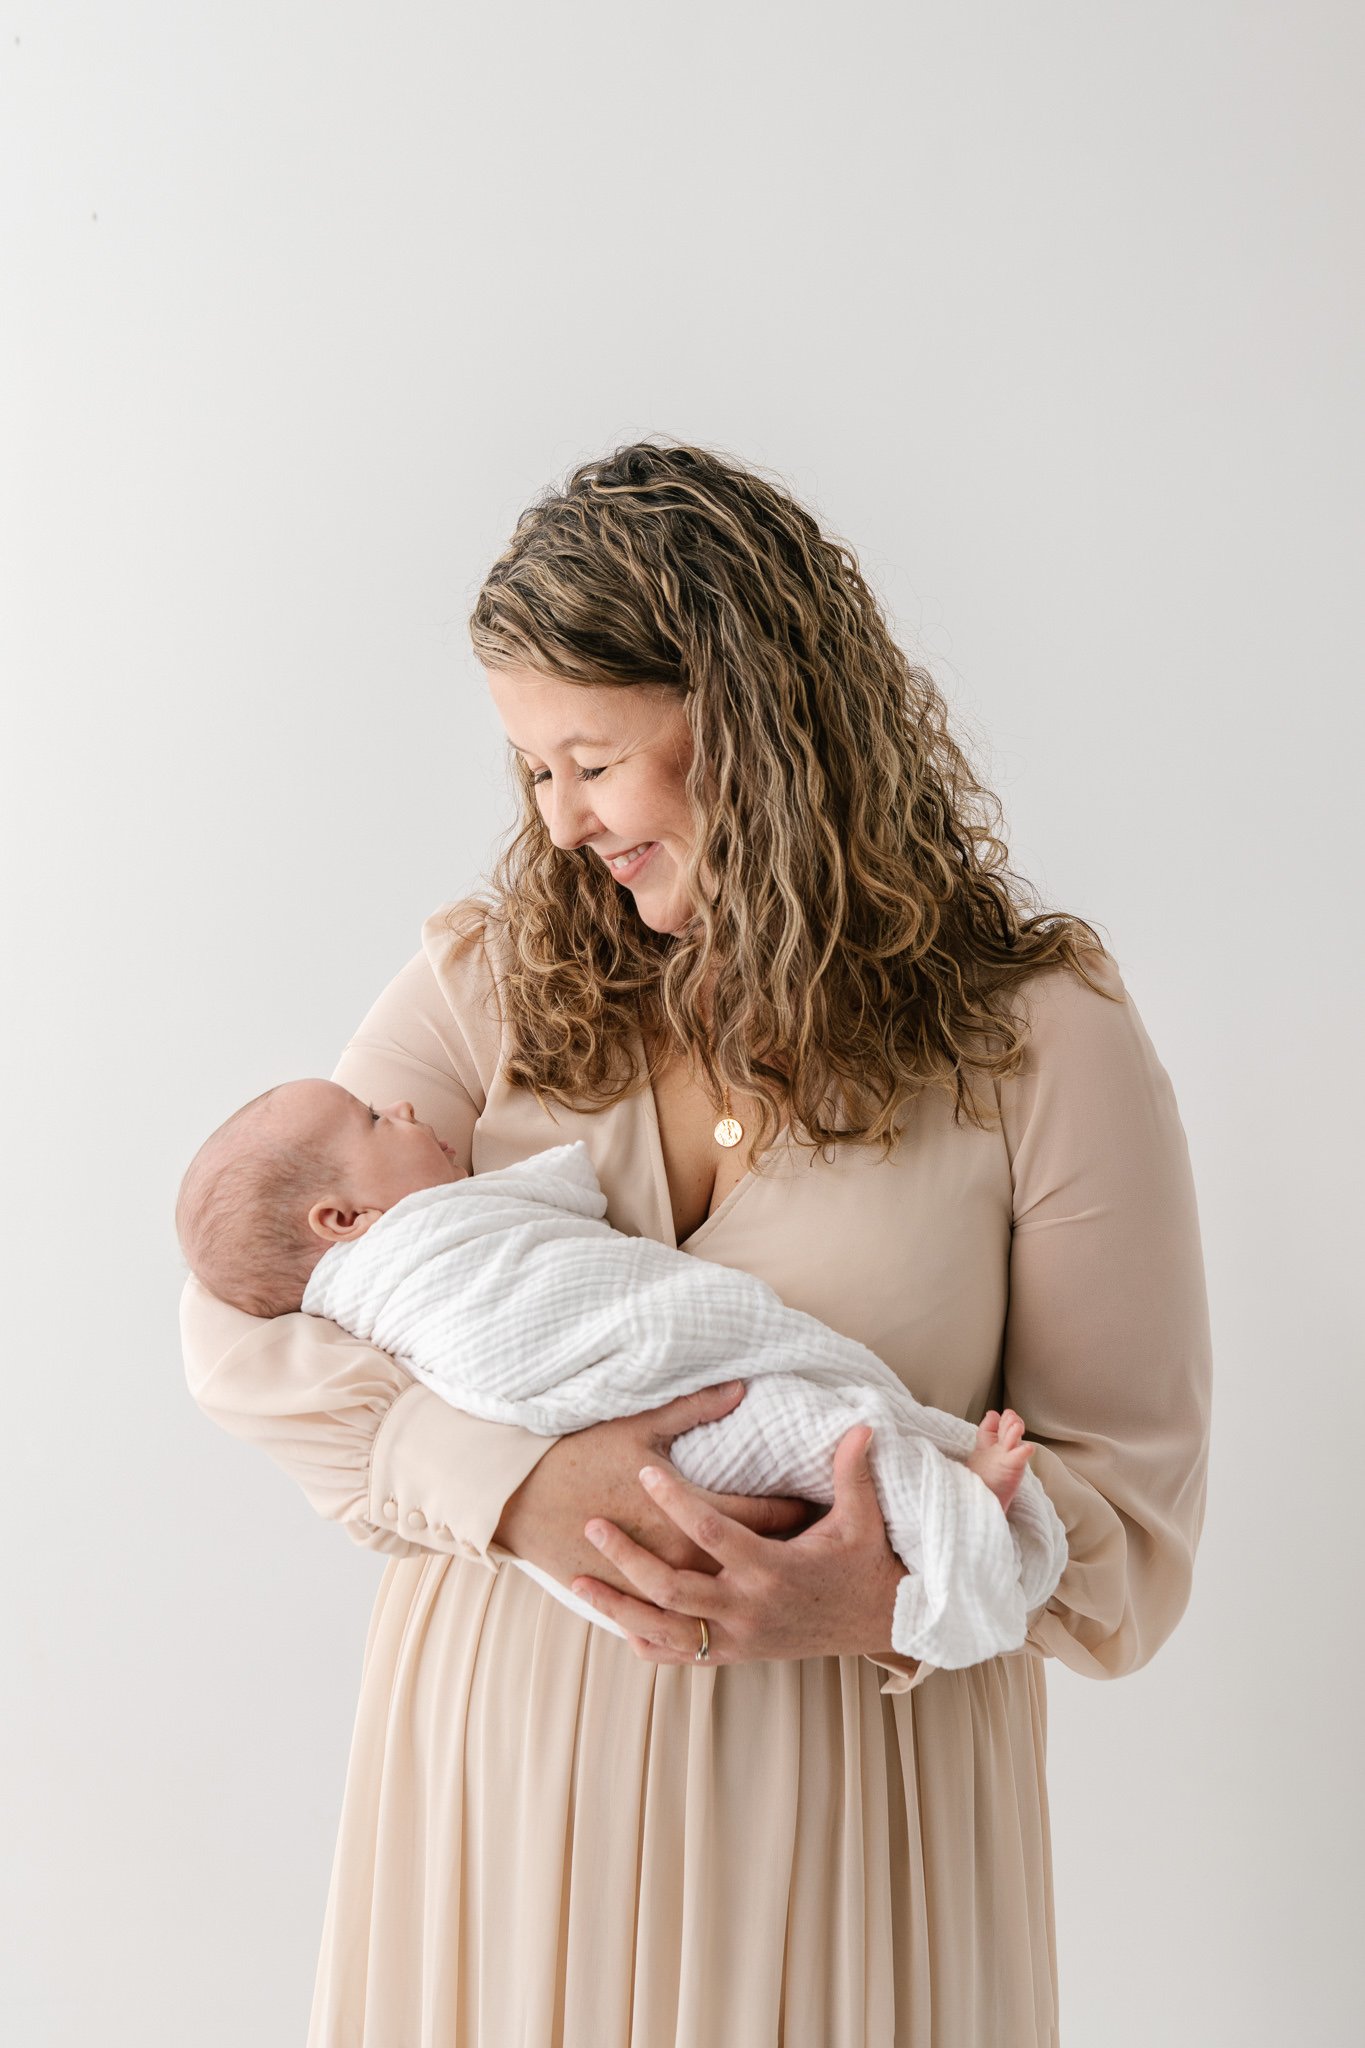  A mother with naturally curly hair holds a newborn in her arms by Nicole Hawkins Photography. newborn and her mother #NicoleHawkinsPhotography #NicoleHawkinsFamily #Newborns #MaplewoodNJ #studiofamilyportraits #modernfamilyportraits 